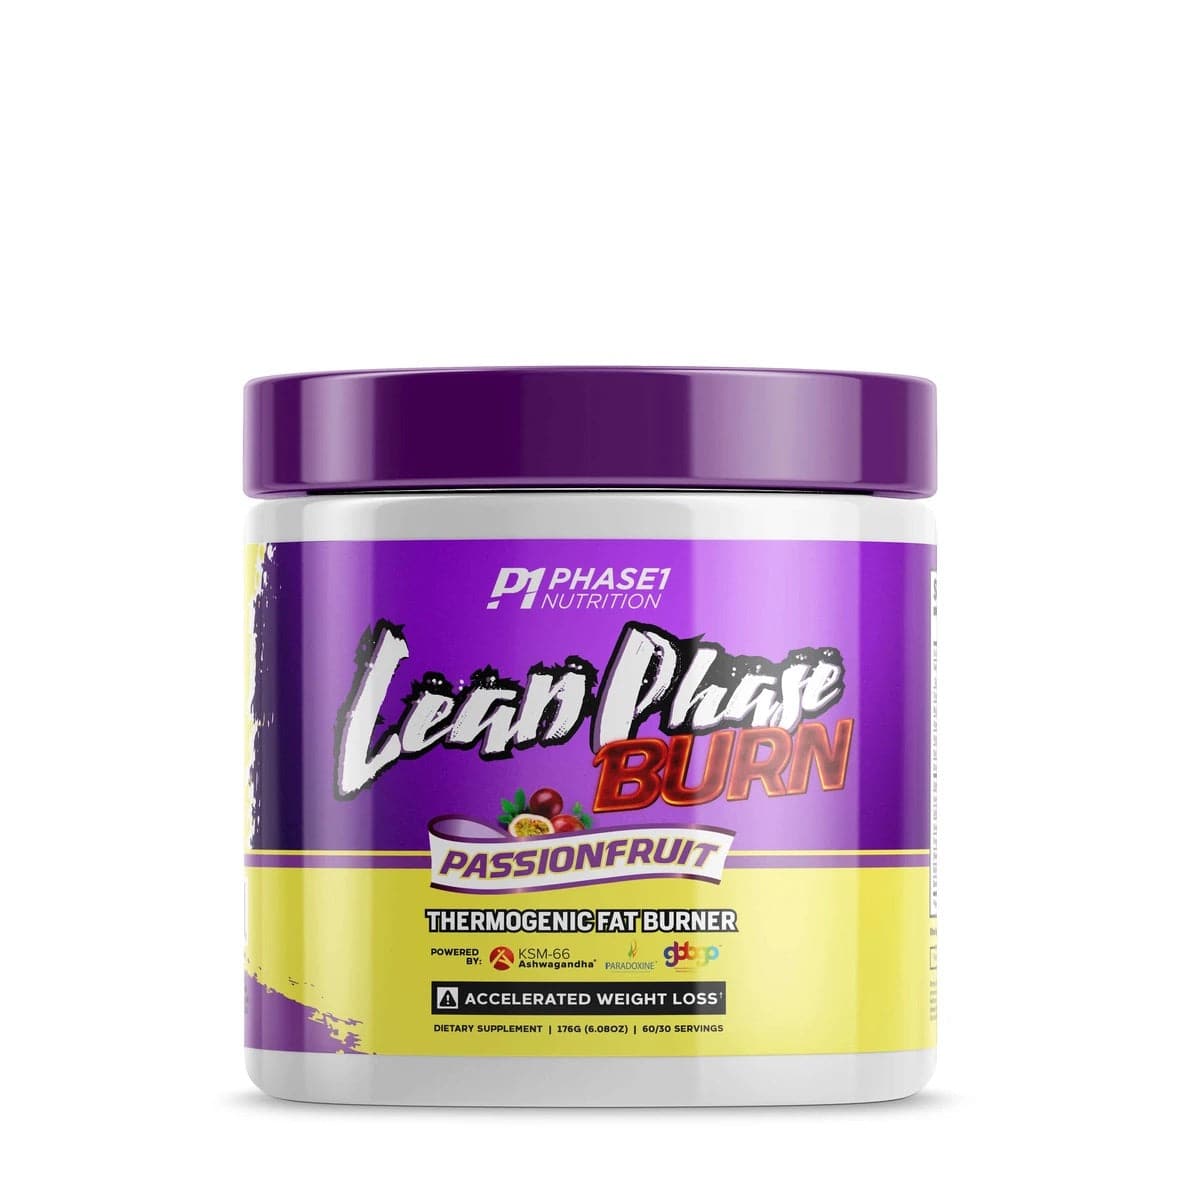 Lean Phase Burn - Phase 1 Nutrition - Prime Sports Nutrition